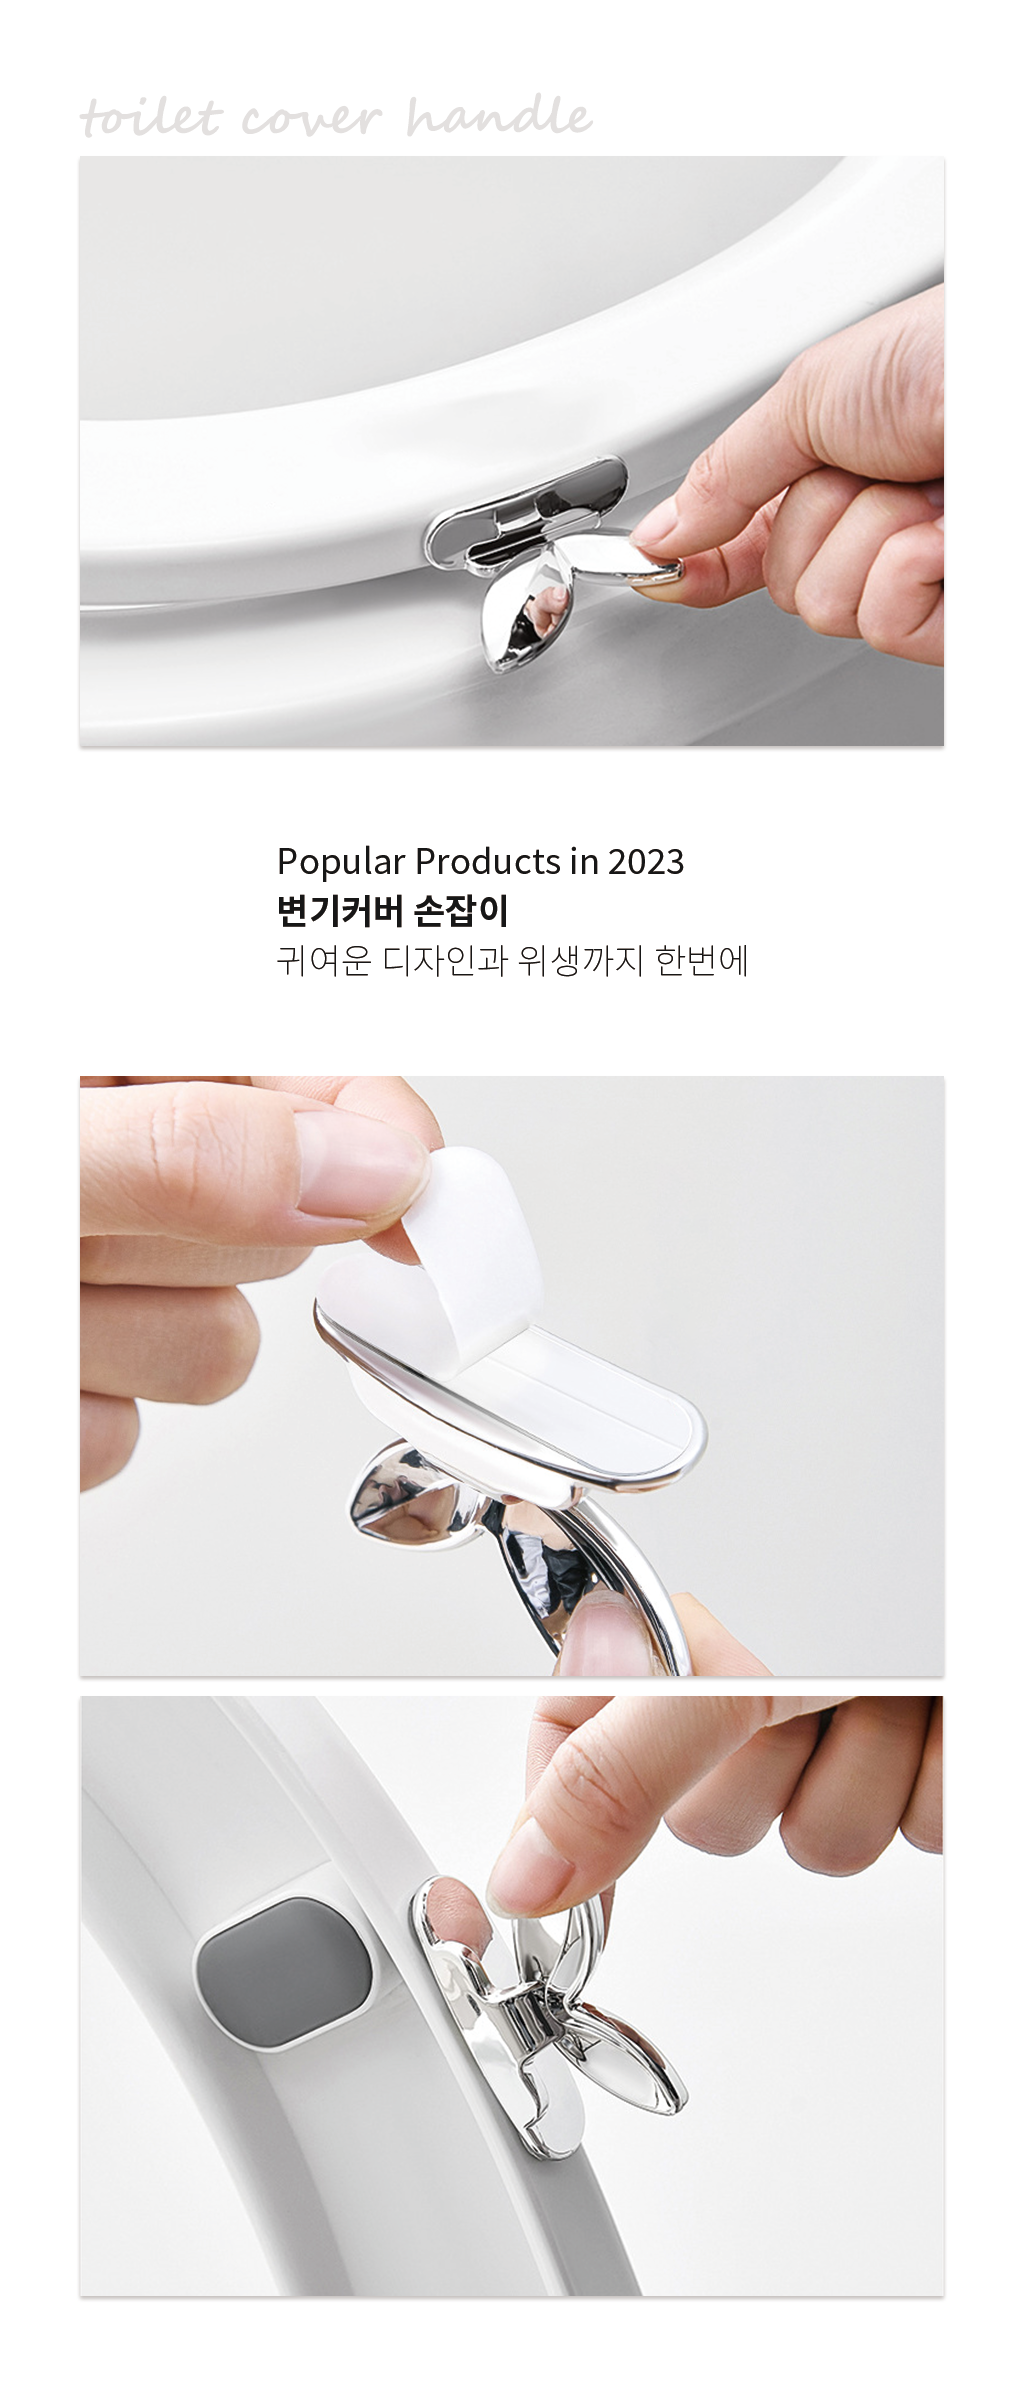 toilet-cover-handle_03.png